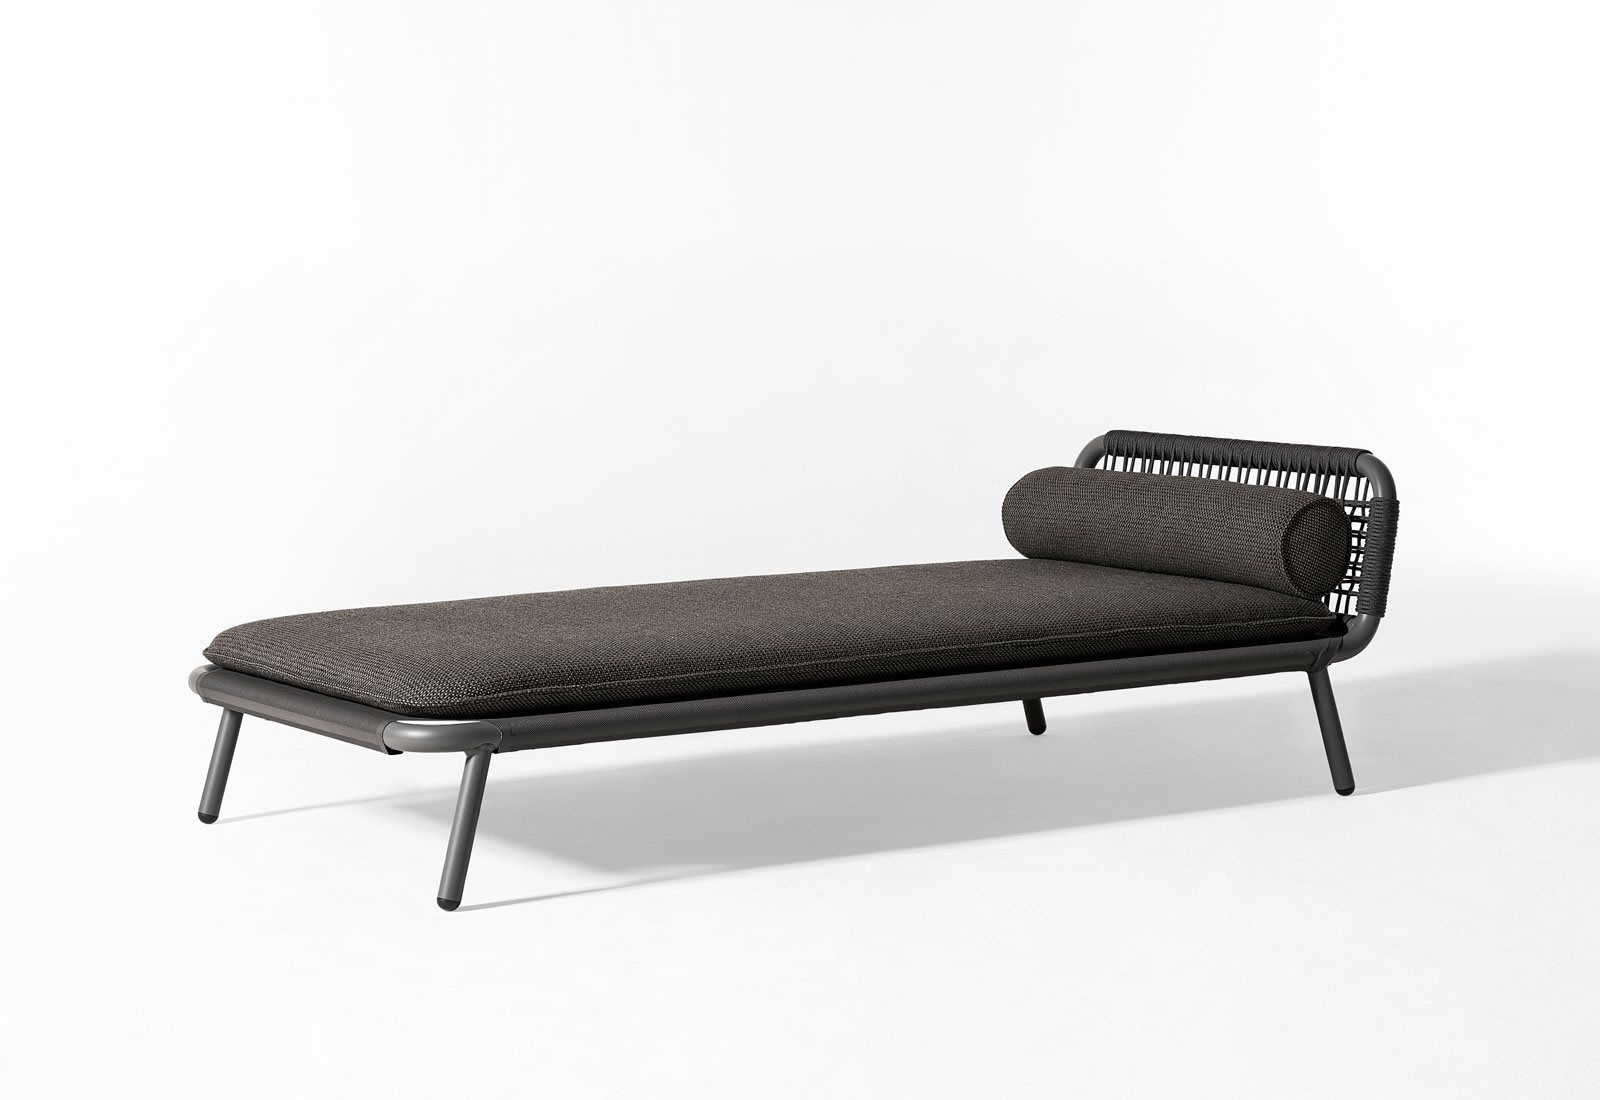 Noa-open-air-lounge-bed-06-1600x1100